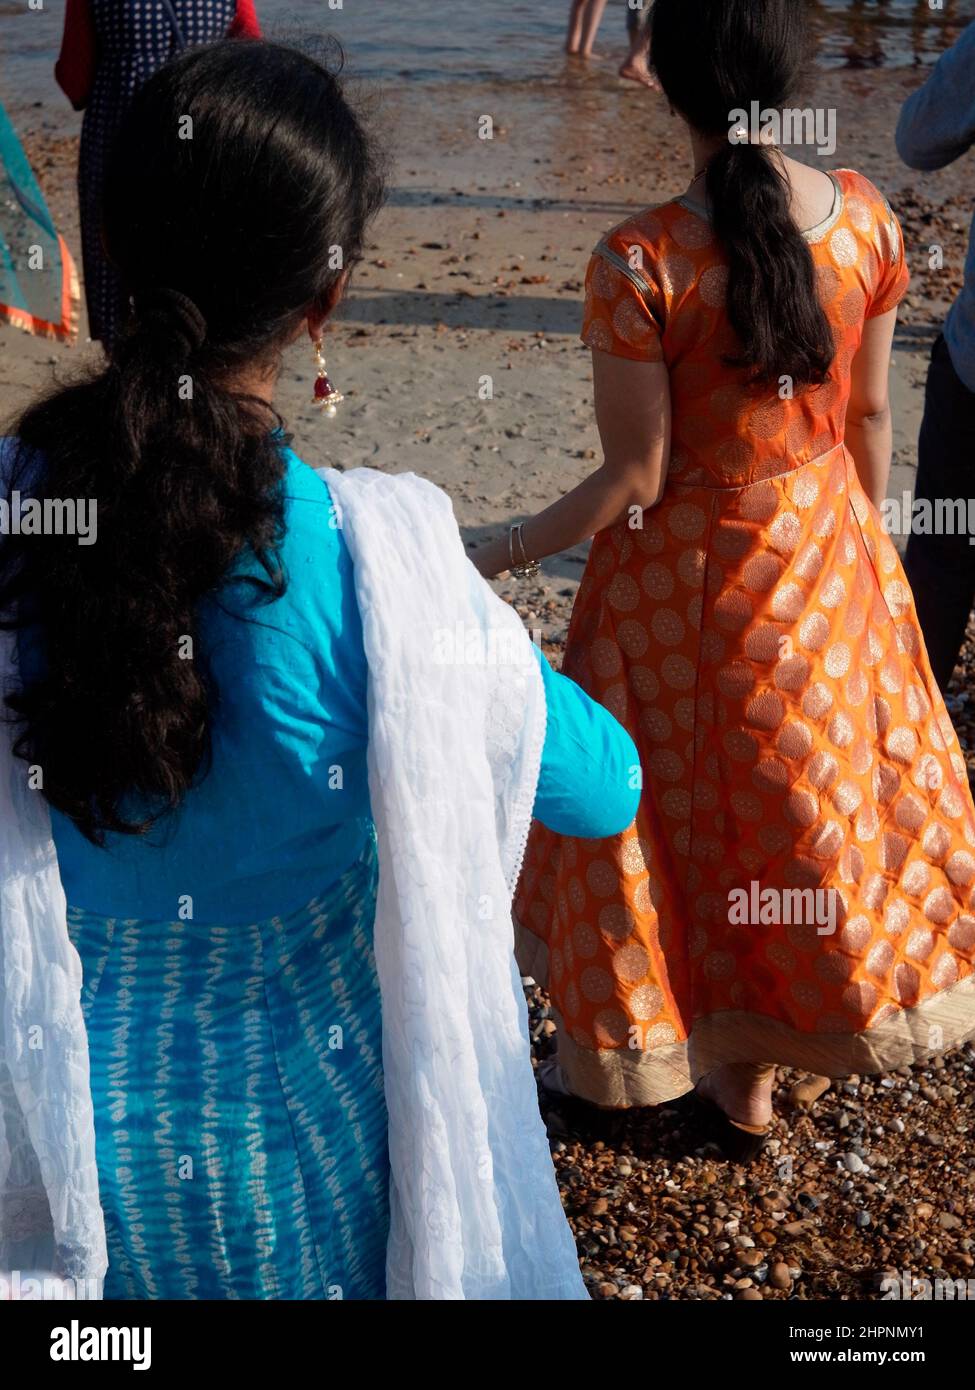 AJAXNETPHOTO. WORTHING, ENGLAND. 28TH AUGUST, 2017. - Celebrating Ganesh Festival in the U.K. -  Members of the local Hindu community in colourful traditional dress attending the annual festival held on the beach. Also known as Ganesh Chaturthi, the important festival celebrates the elephant-headed son of Lord shiva and Goddess Parvati, a symbol of wisdom, prosperity and good fortune. The model is made of plaster of paris and dissolves in sea-water.  PHOTO:JONATHAN EASTLAND/AJAXREF:GXR172708 76825 Stock Photo